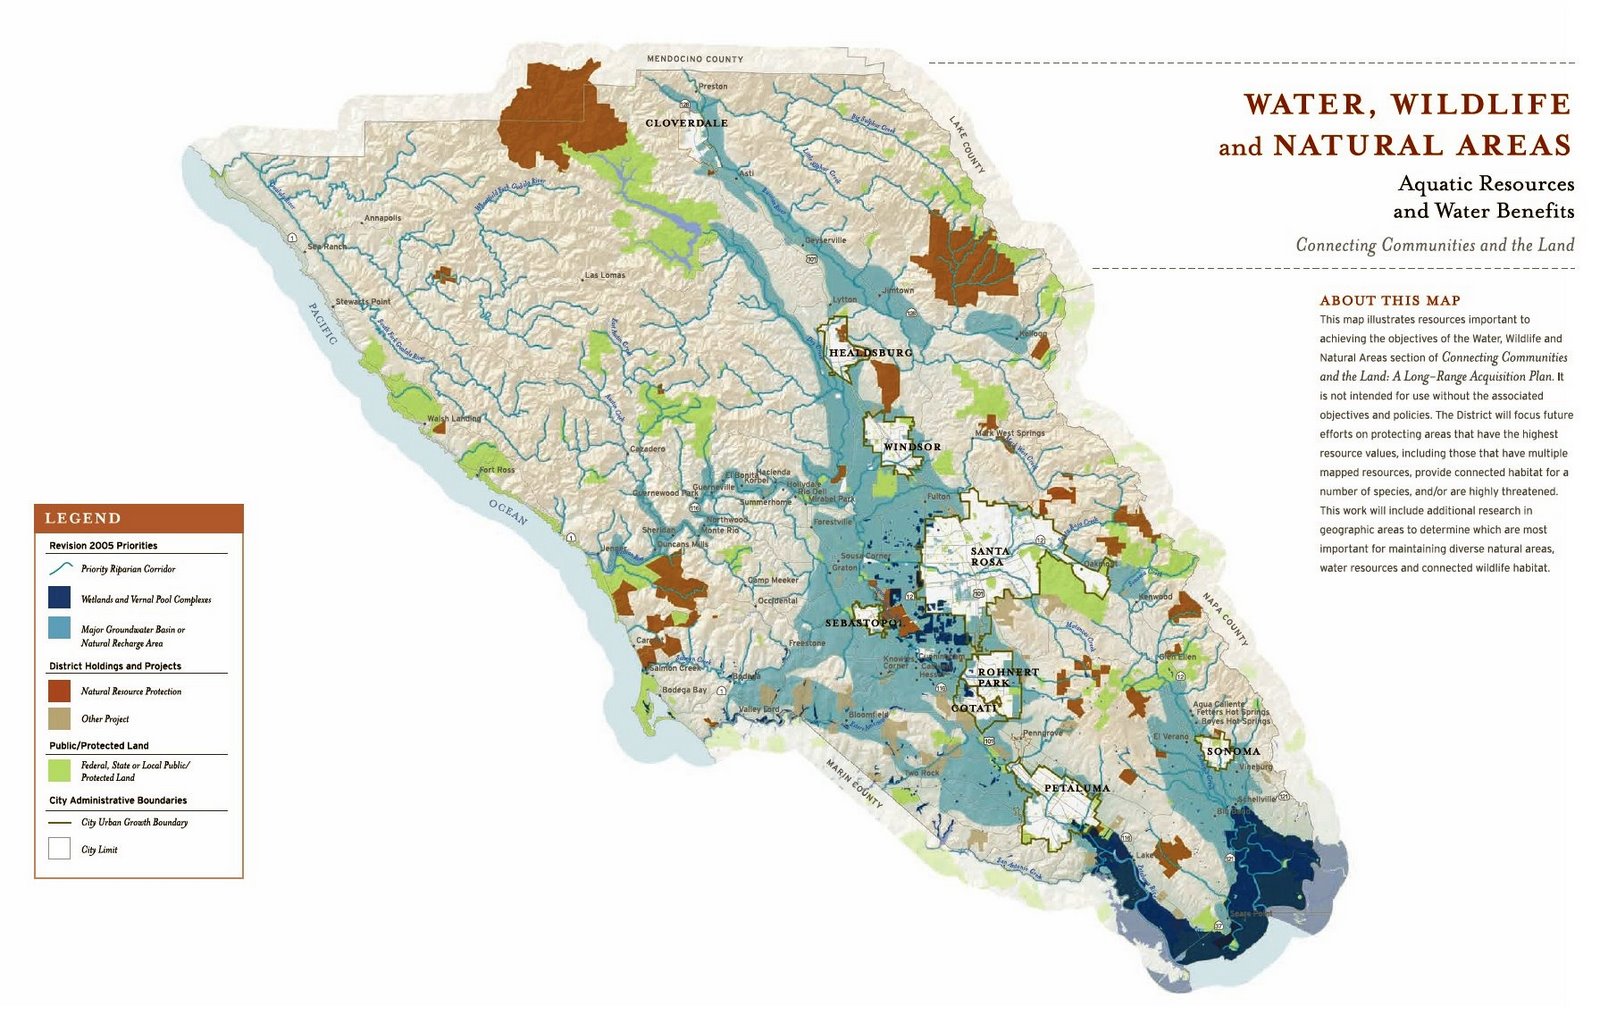 [sonoma+county+open+space+and+growth+boundaries.jpg]